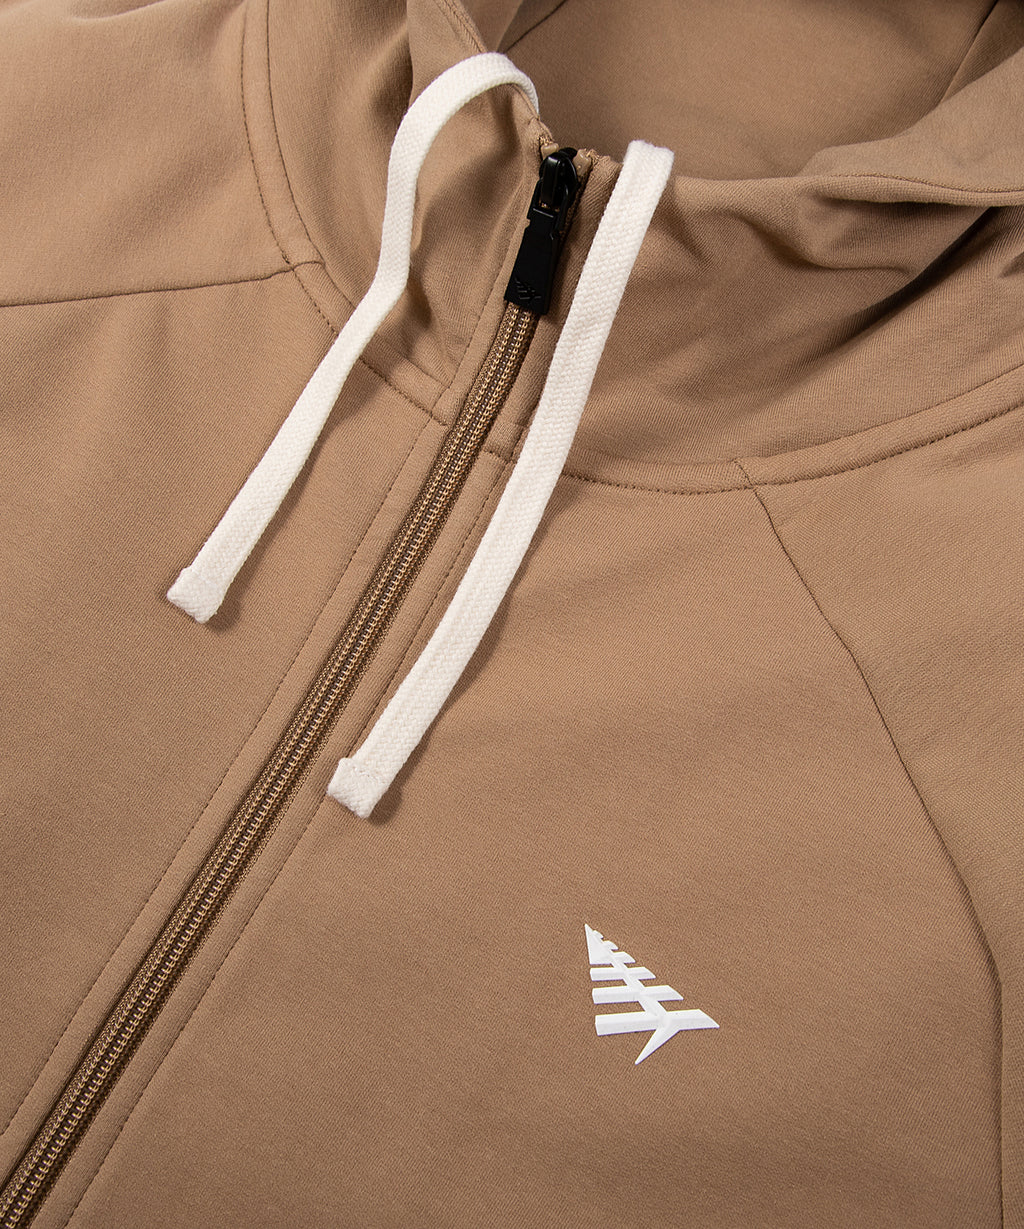  Zipper and drawcord at neck opening on Paper Planes Full Zip Hoodie, color Maple.